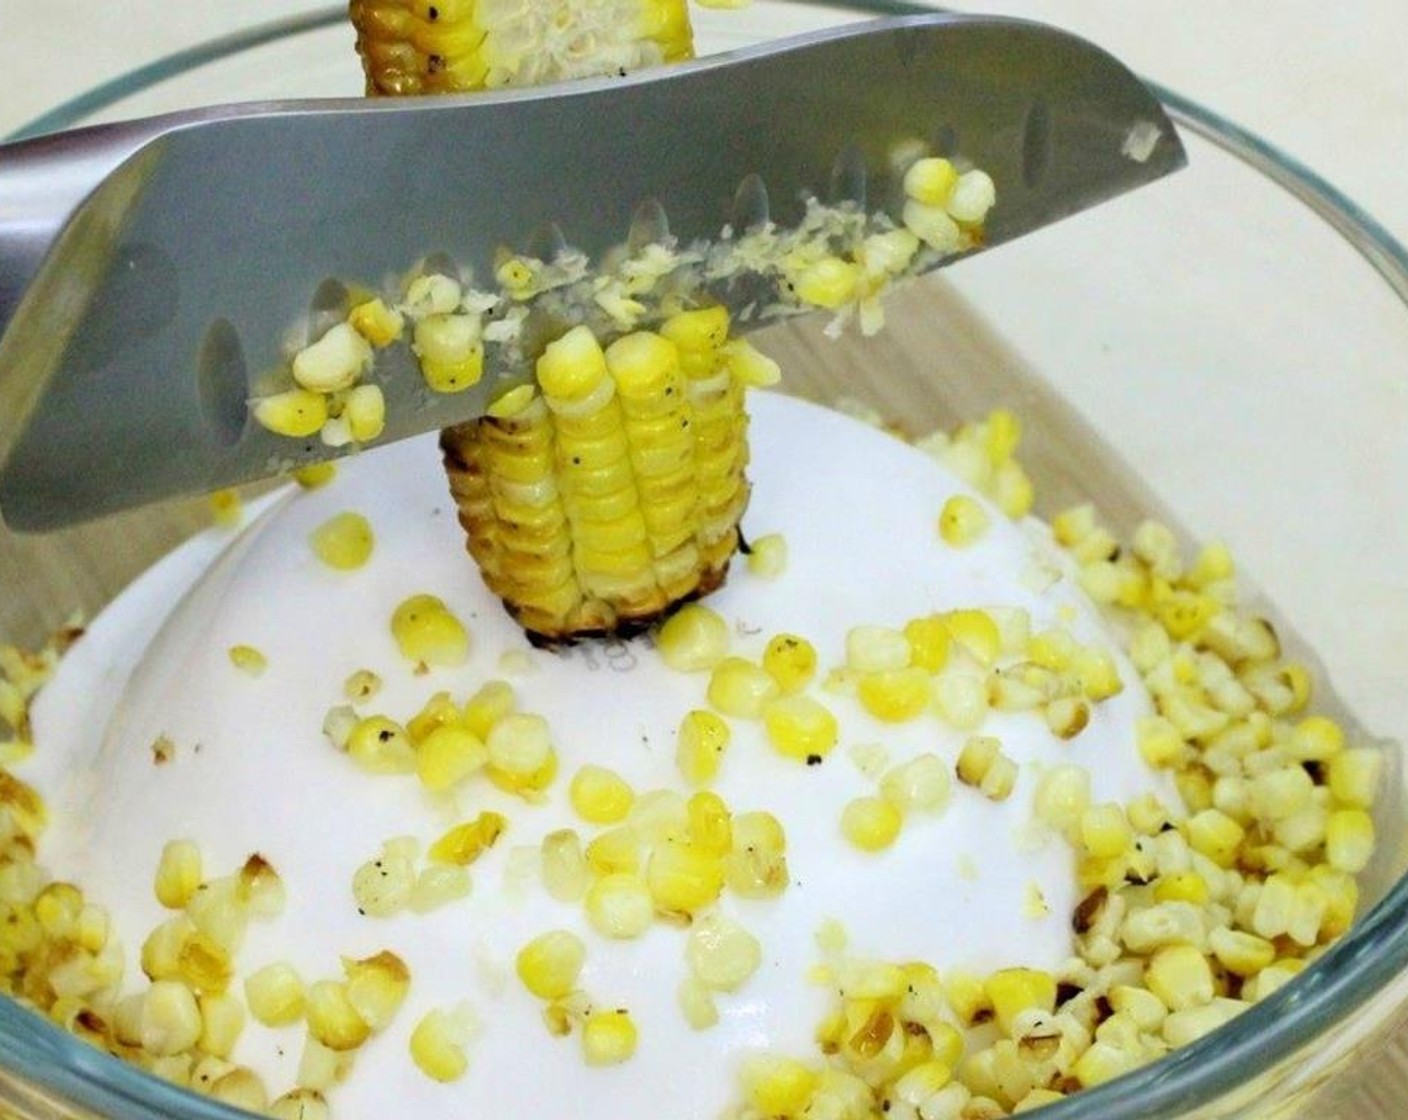 step 6 Strip the kernels of the corn once they are cool. A trick that I found works great is to set a small bowl upside down into a large bowl, place the corn on top of the small bowl and strip.